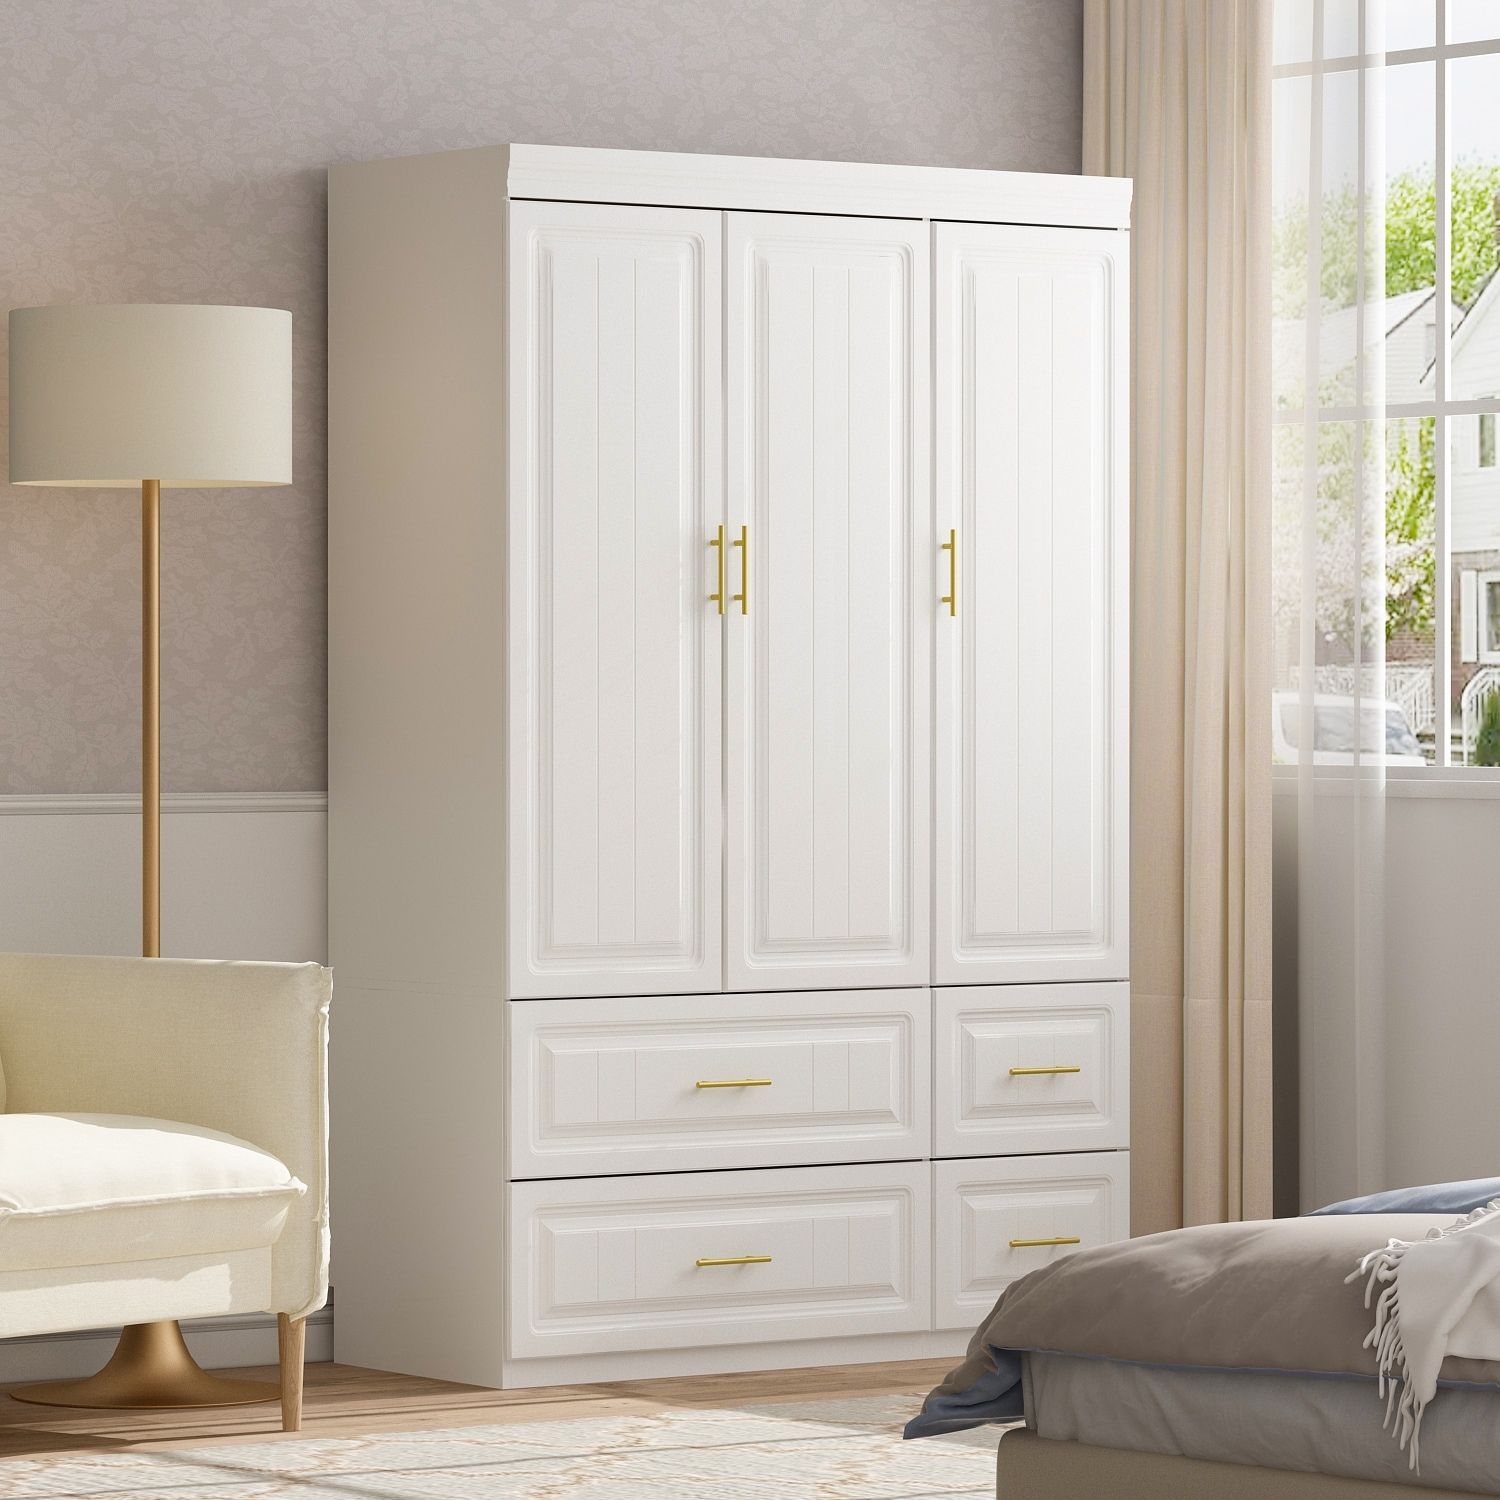 Modern Freestanding Wardrobe Armoire Closet High Cabinet Storage White –  Bed Bath & Beyond – 36256383 With White Wardrobes Armoire (View 7 of 15)